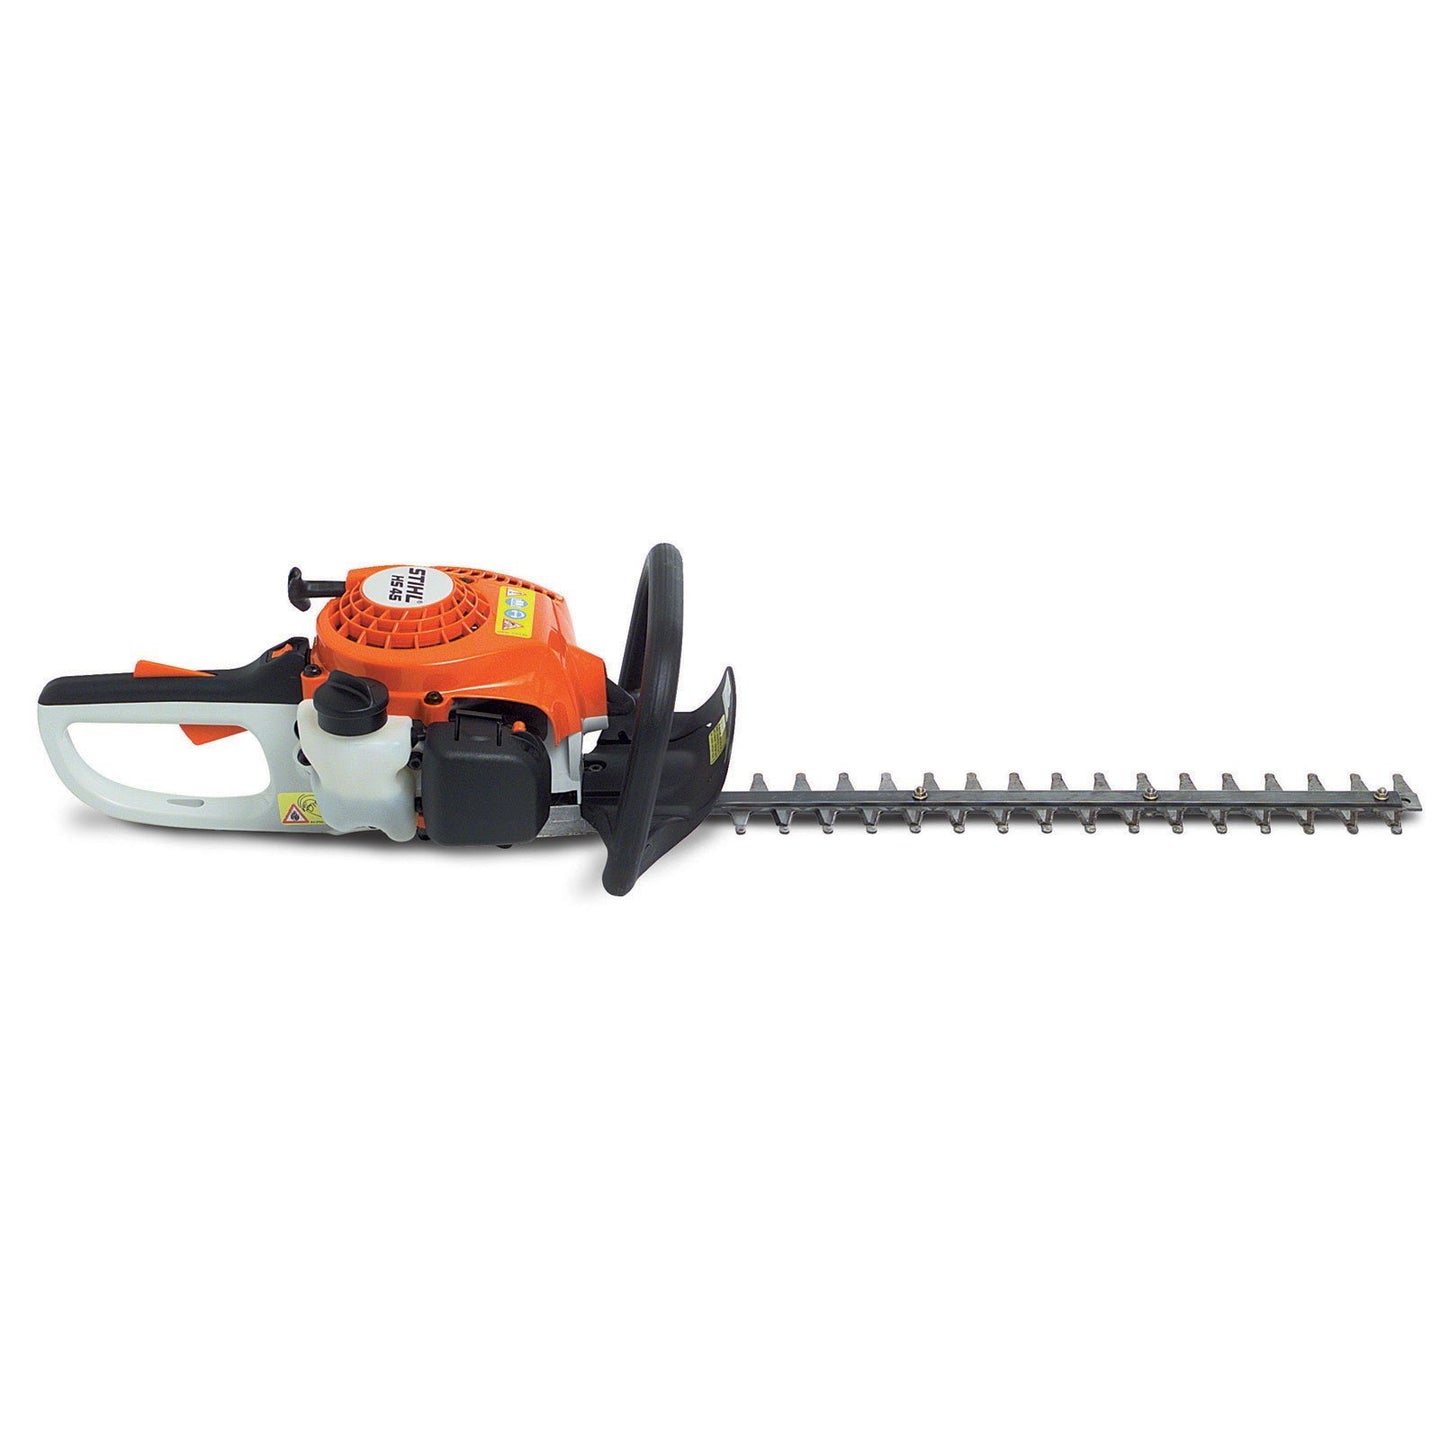 STIHL HS45 Hedge Trimmer Review